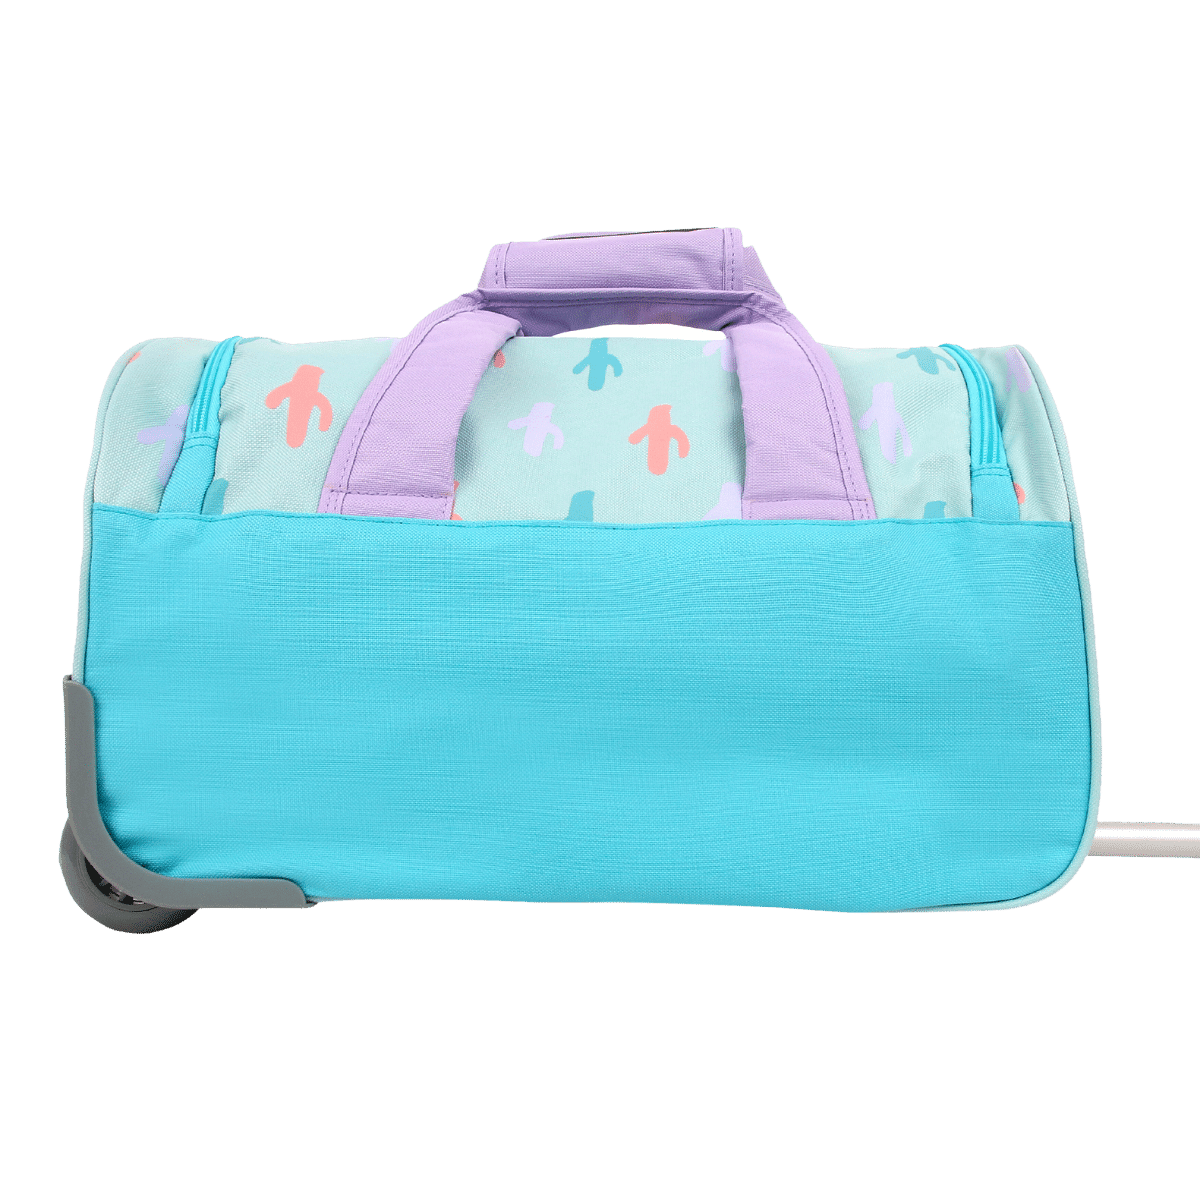 Kids Rolling Duffel Bag  A Durable and Versatile Bag for Kids